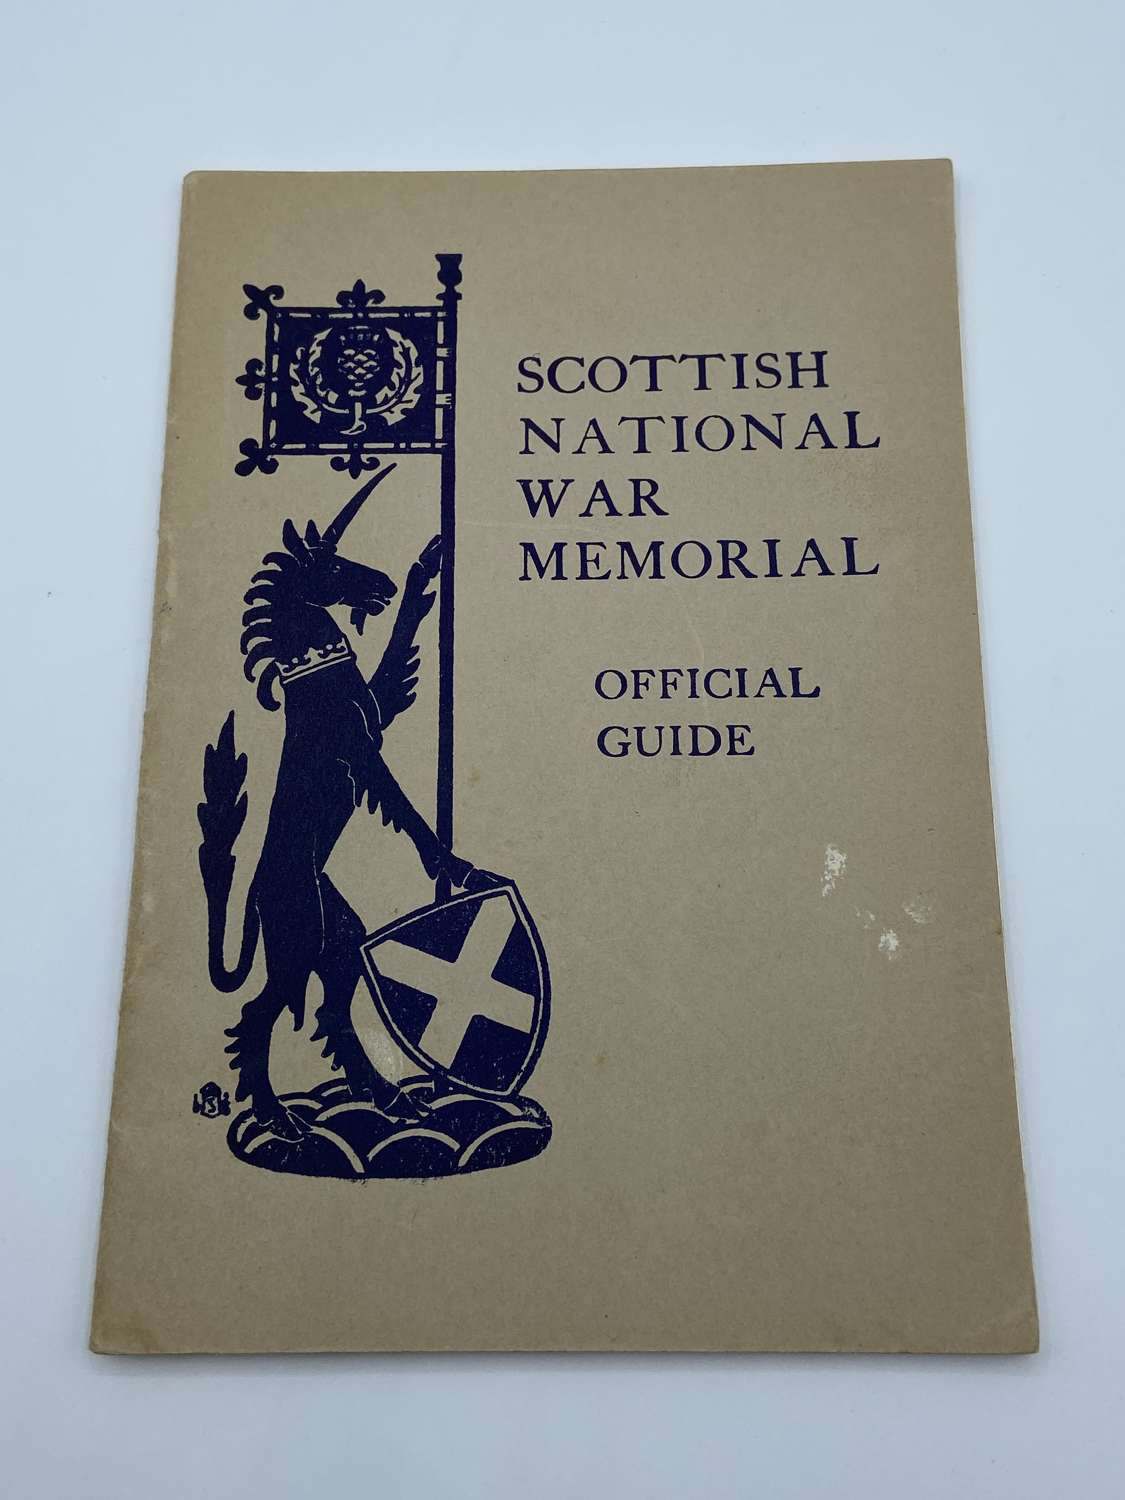 WW2 1943 Dated Scottish National War Memorial Official Guide